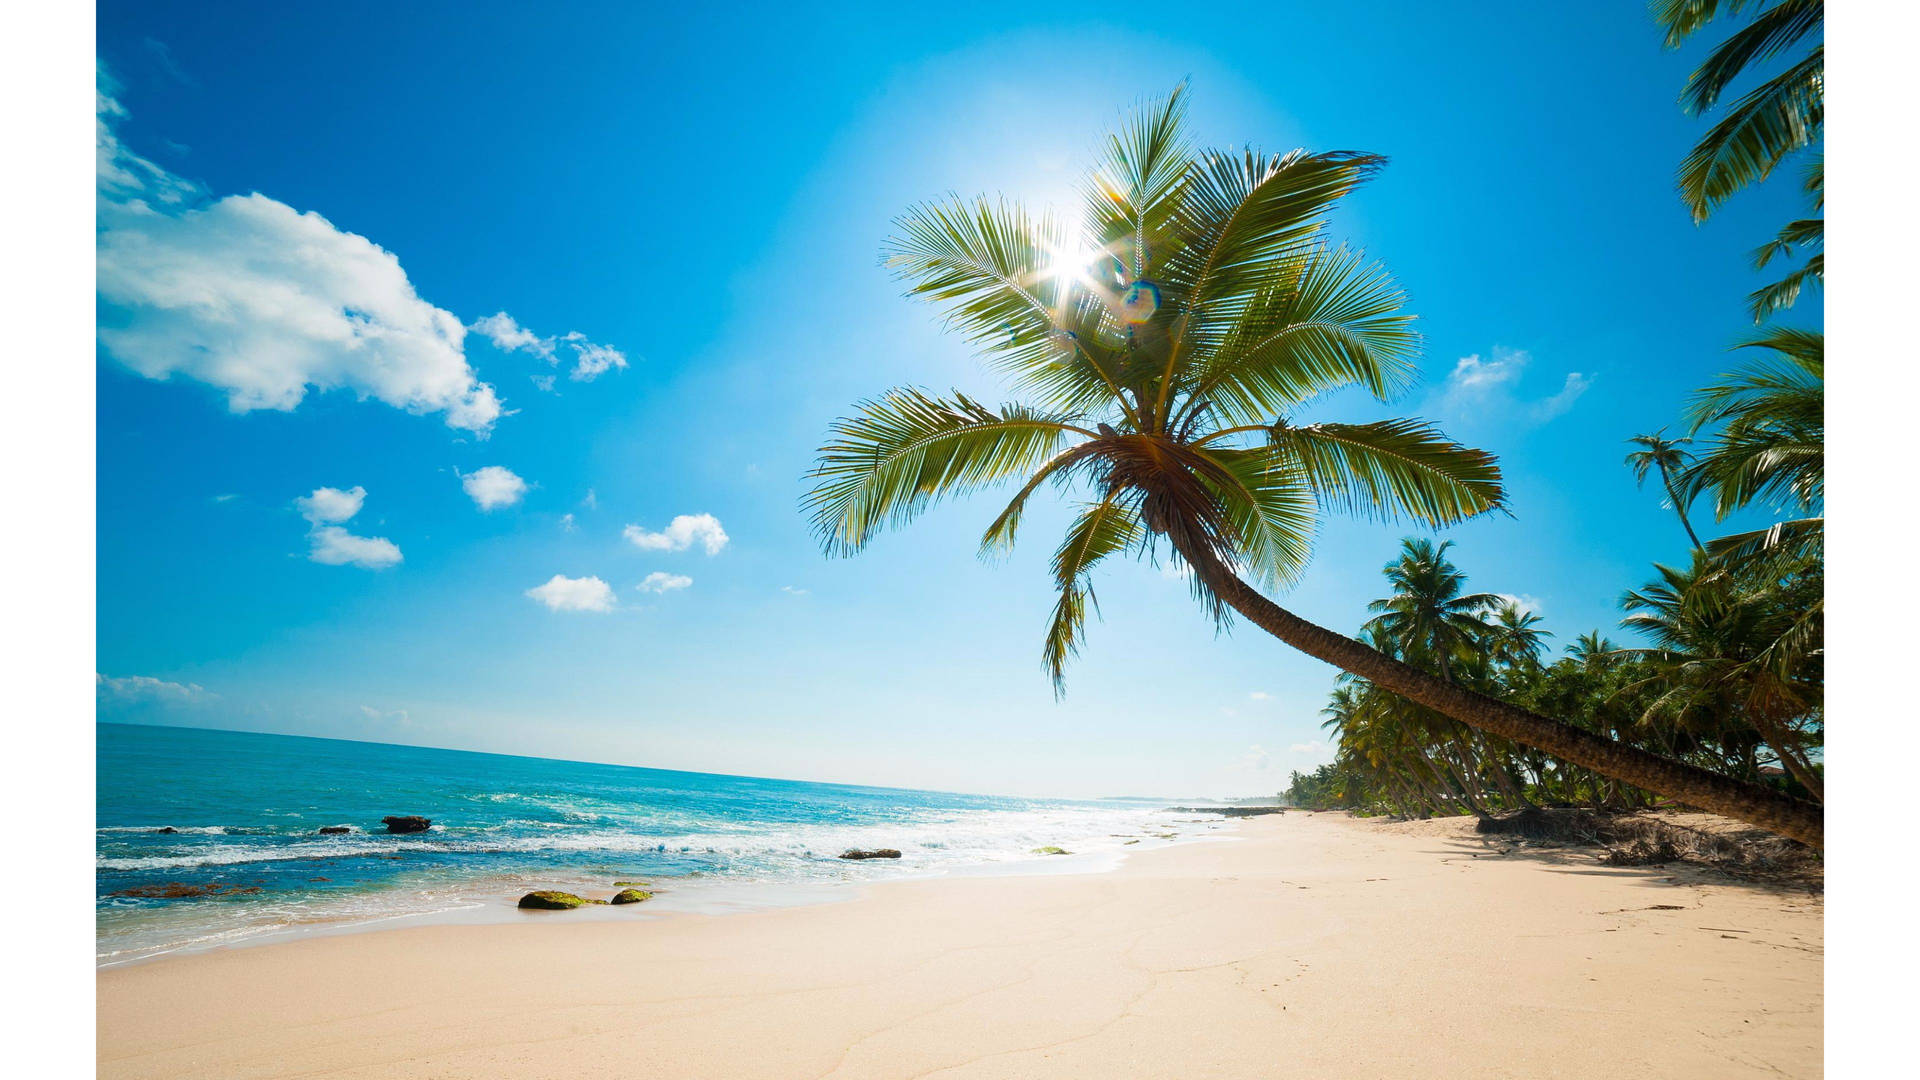 4k Beach With Hanging Tree Wallpaper